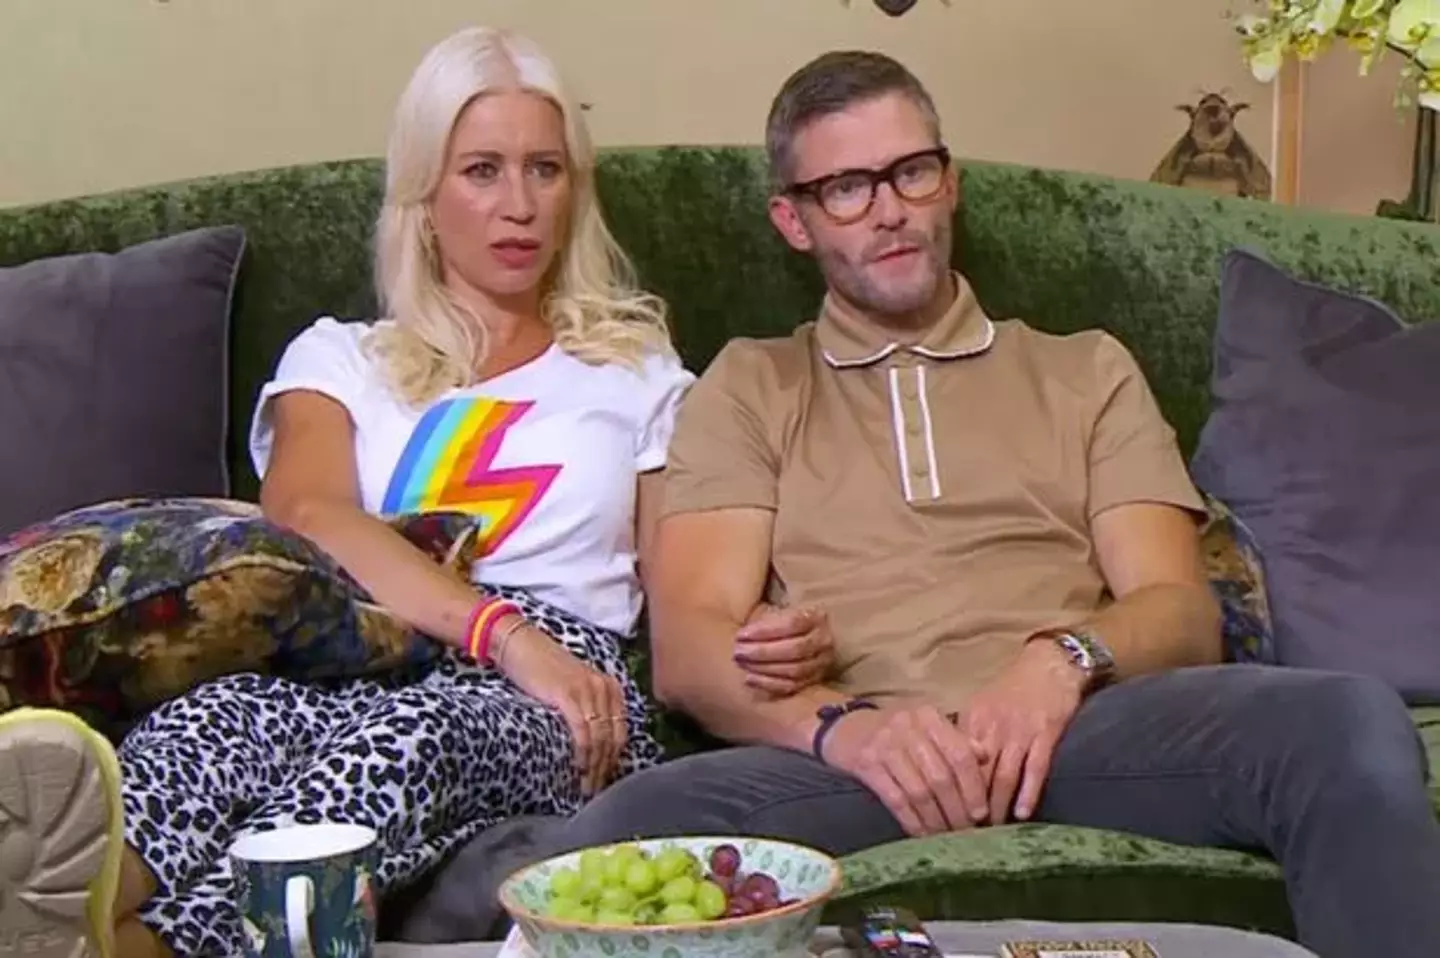 The pair used to regularly appear on Celebrity Gogglebox together.